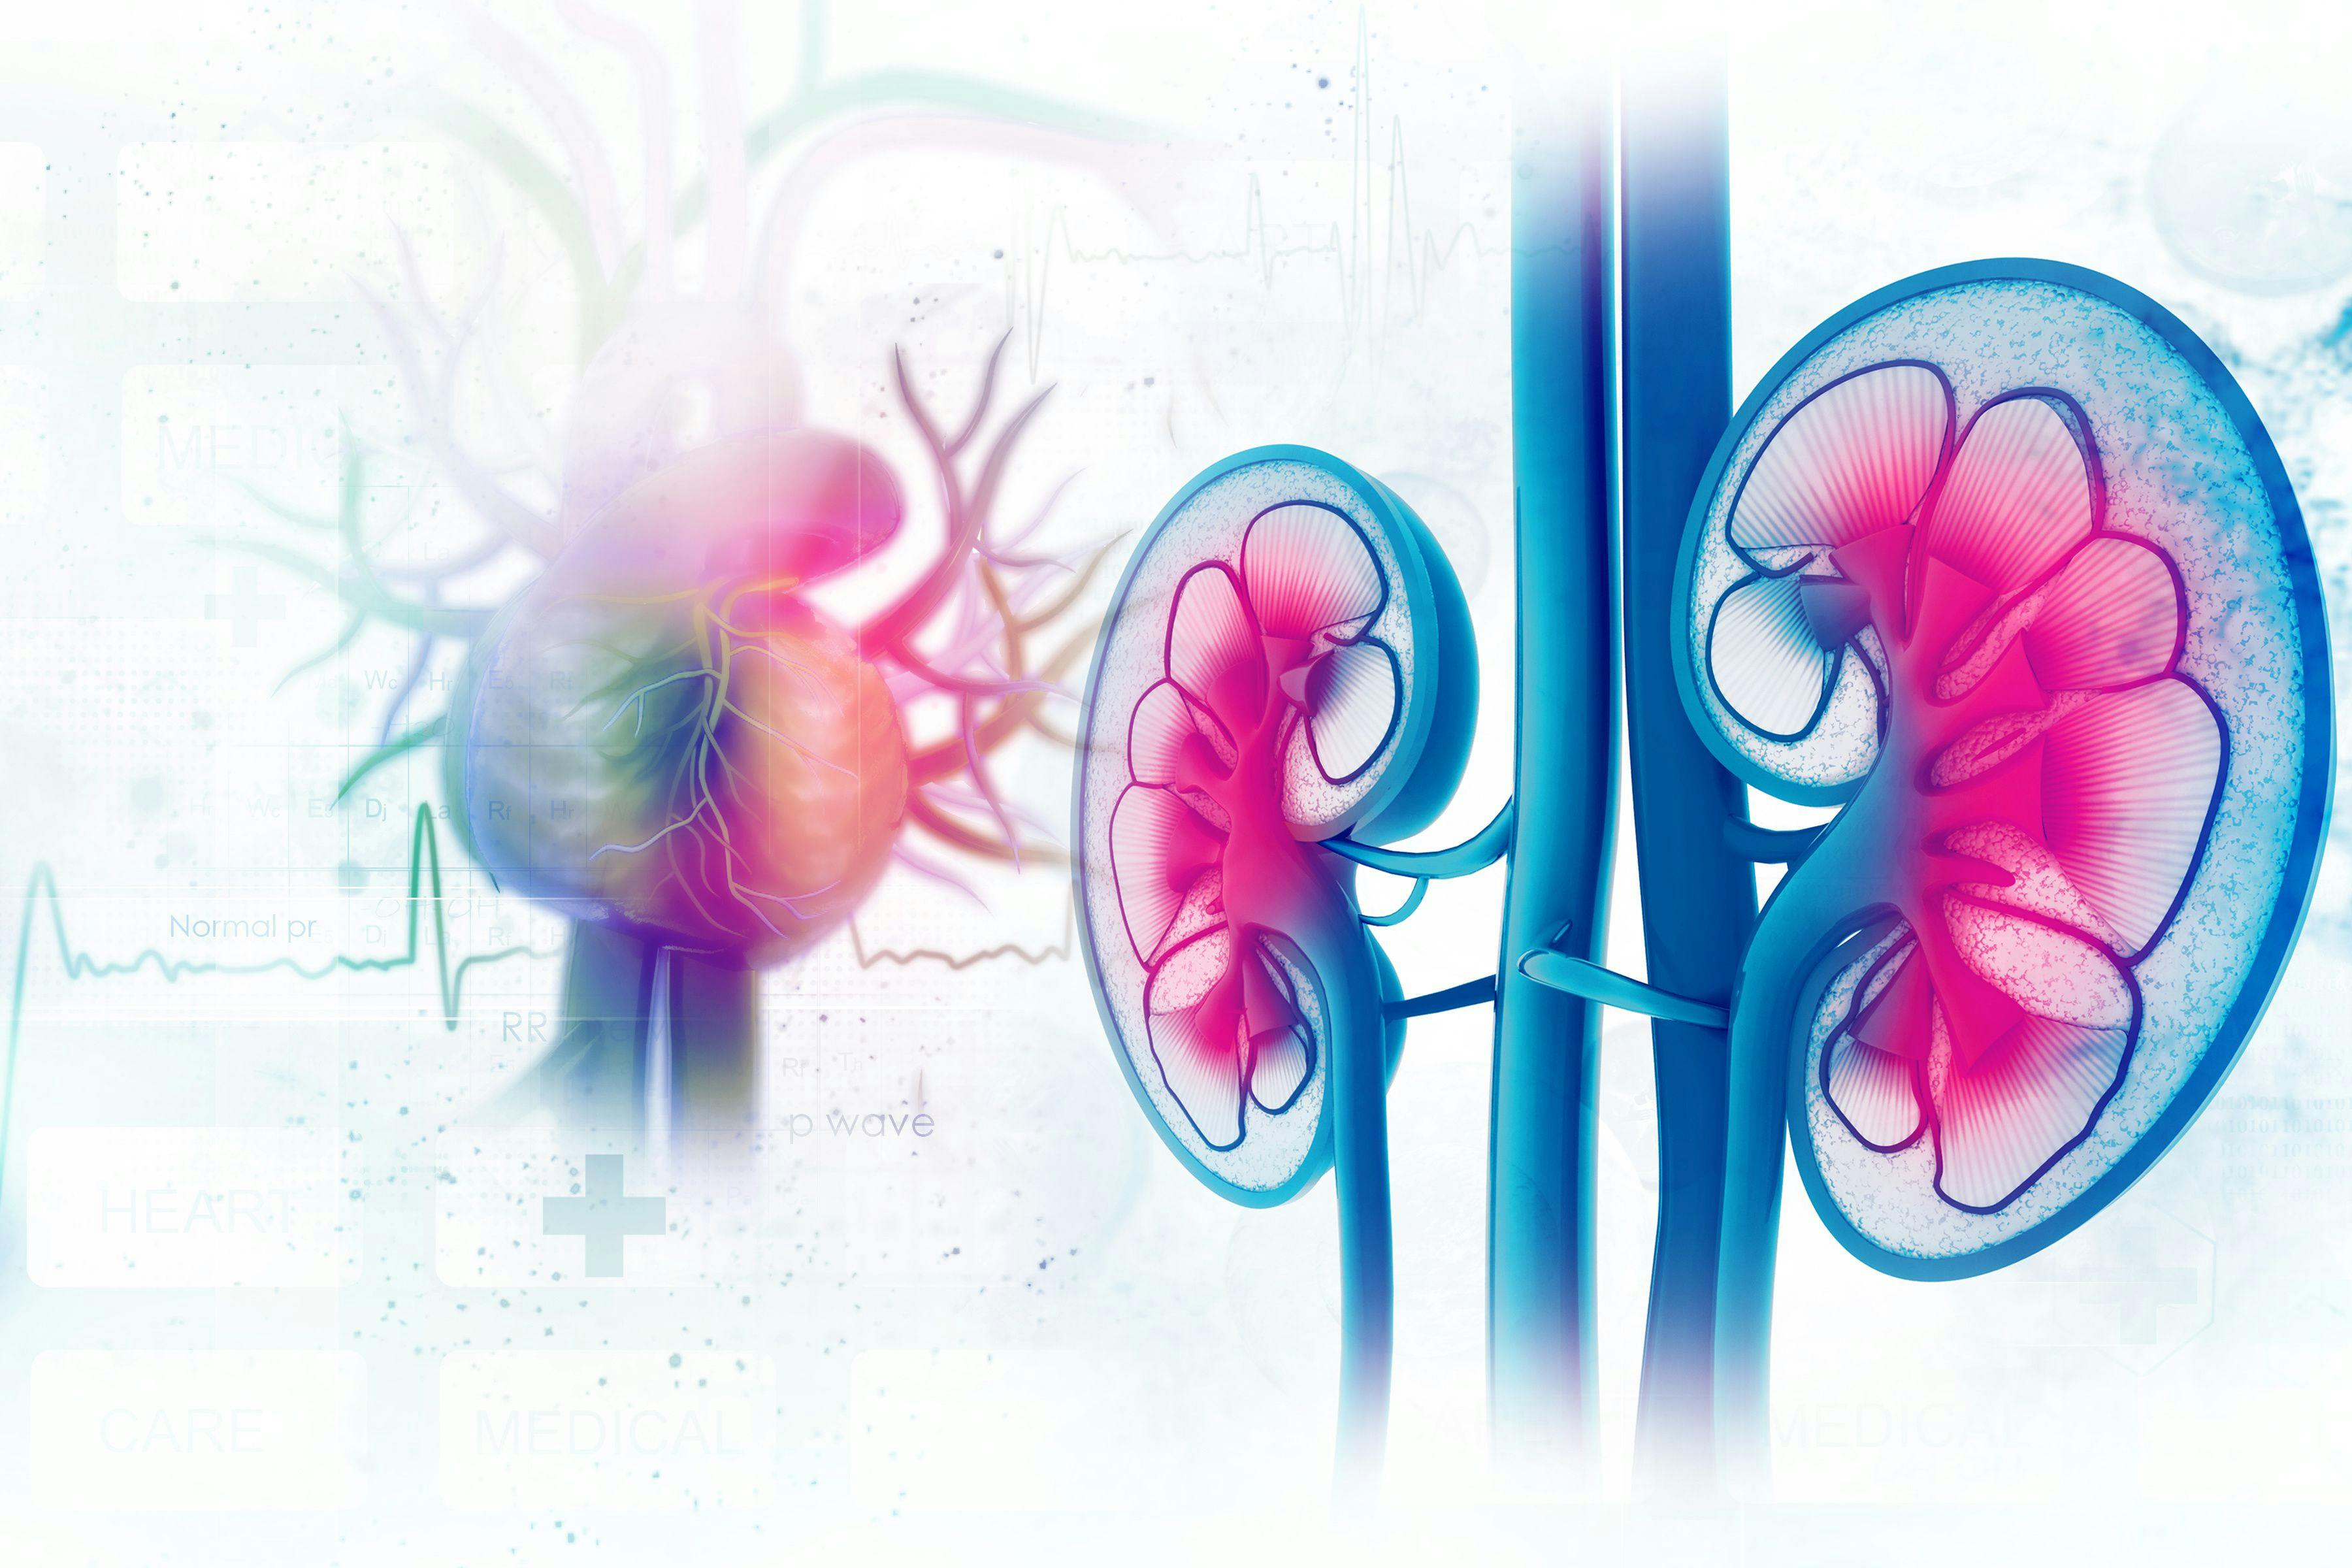 New findings indicate that treatment with cabozantinib following the use of immunotherapy proved to be safe and feasible in metastatic renal cell carcinoma.